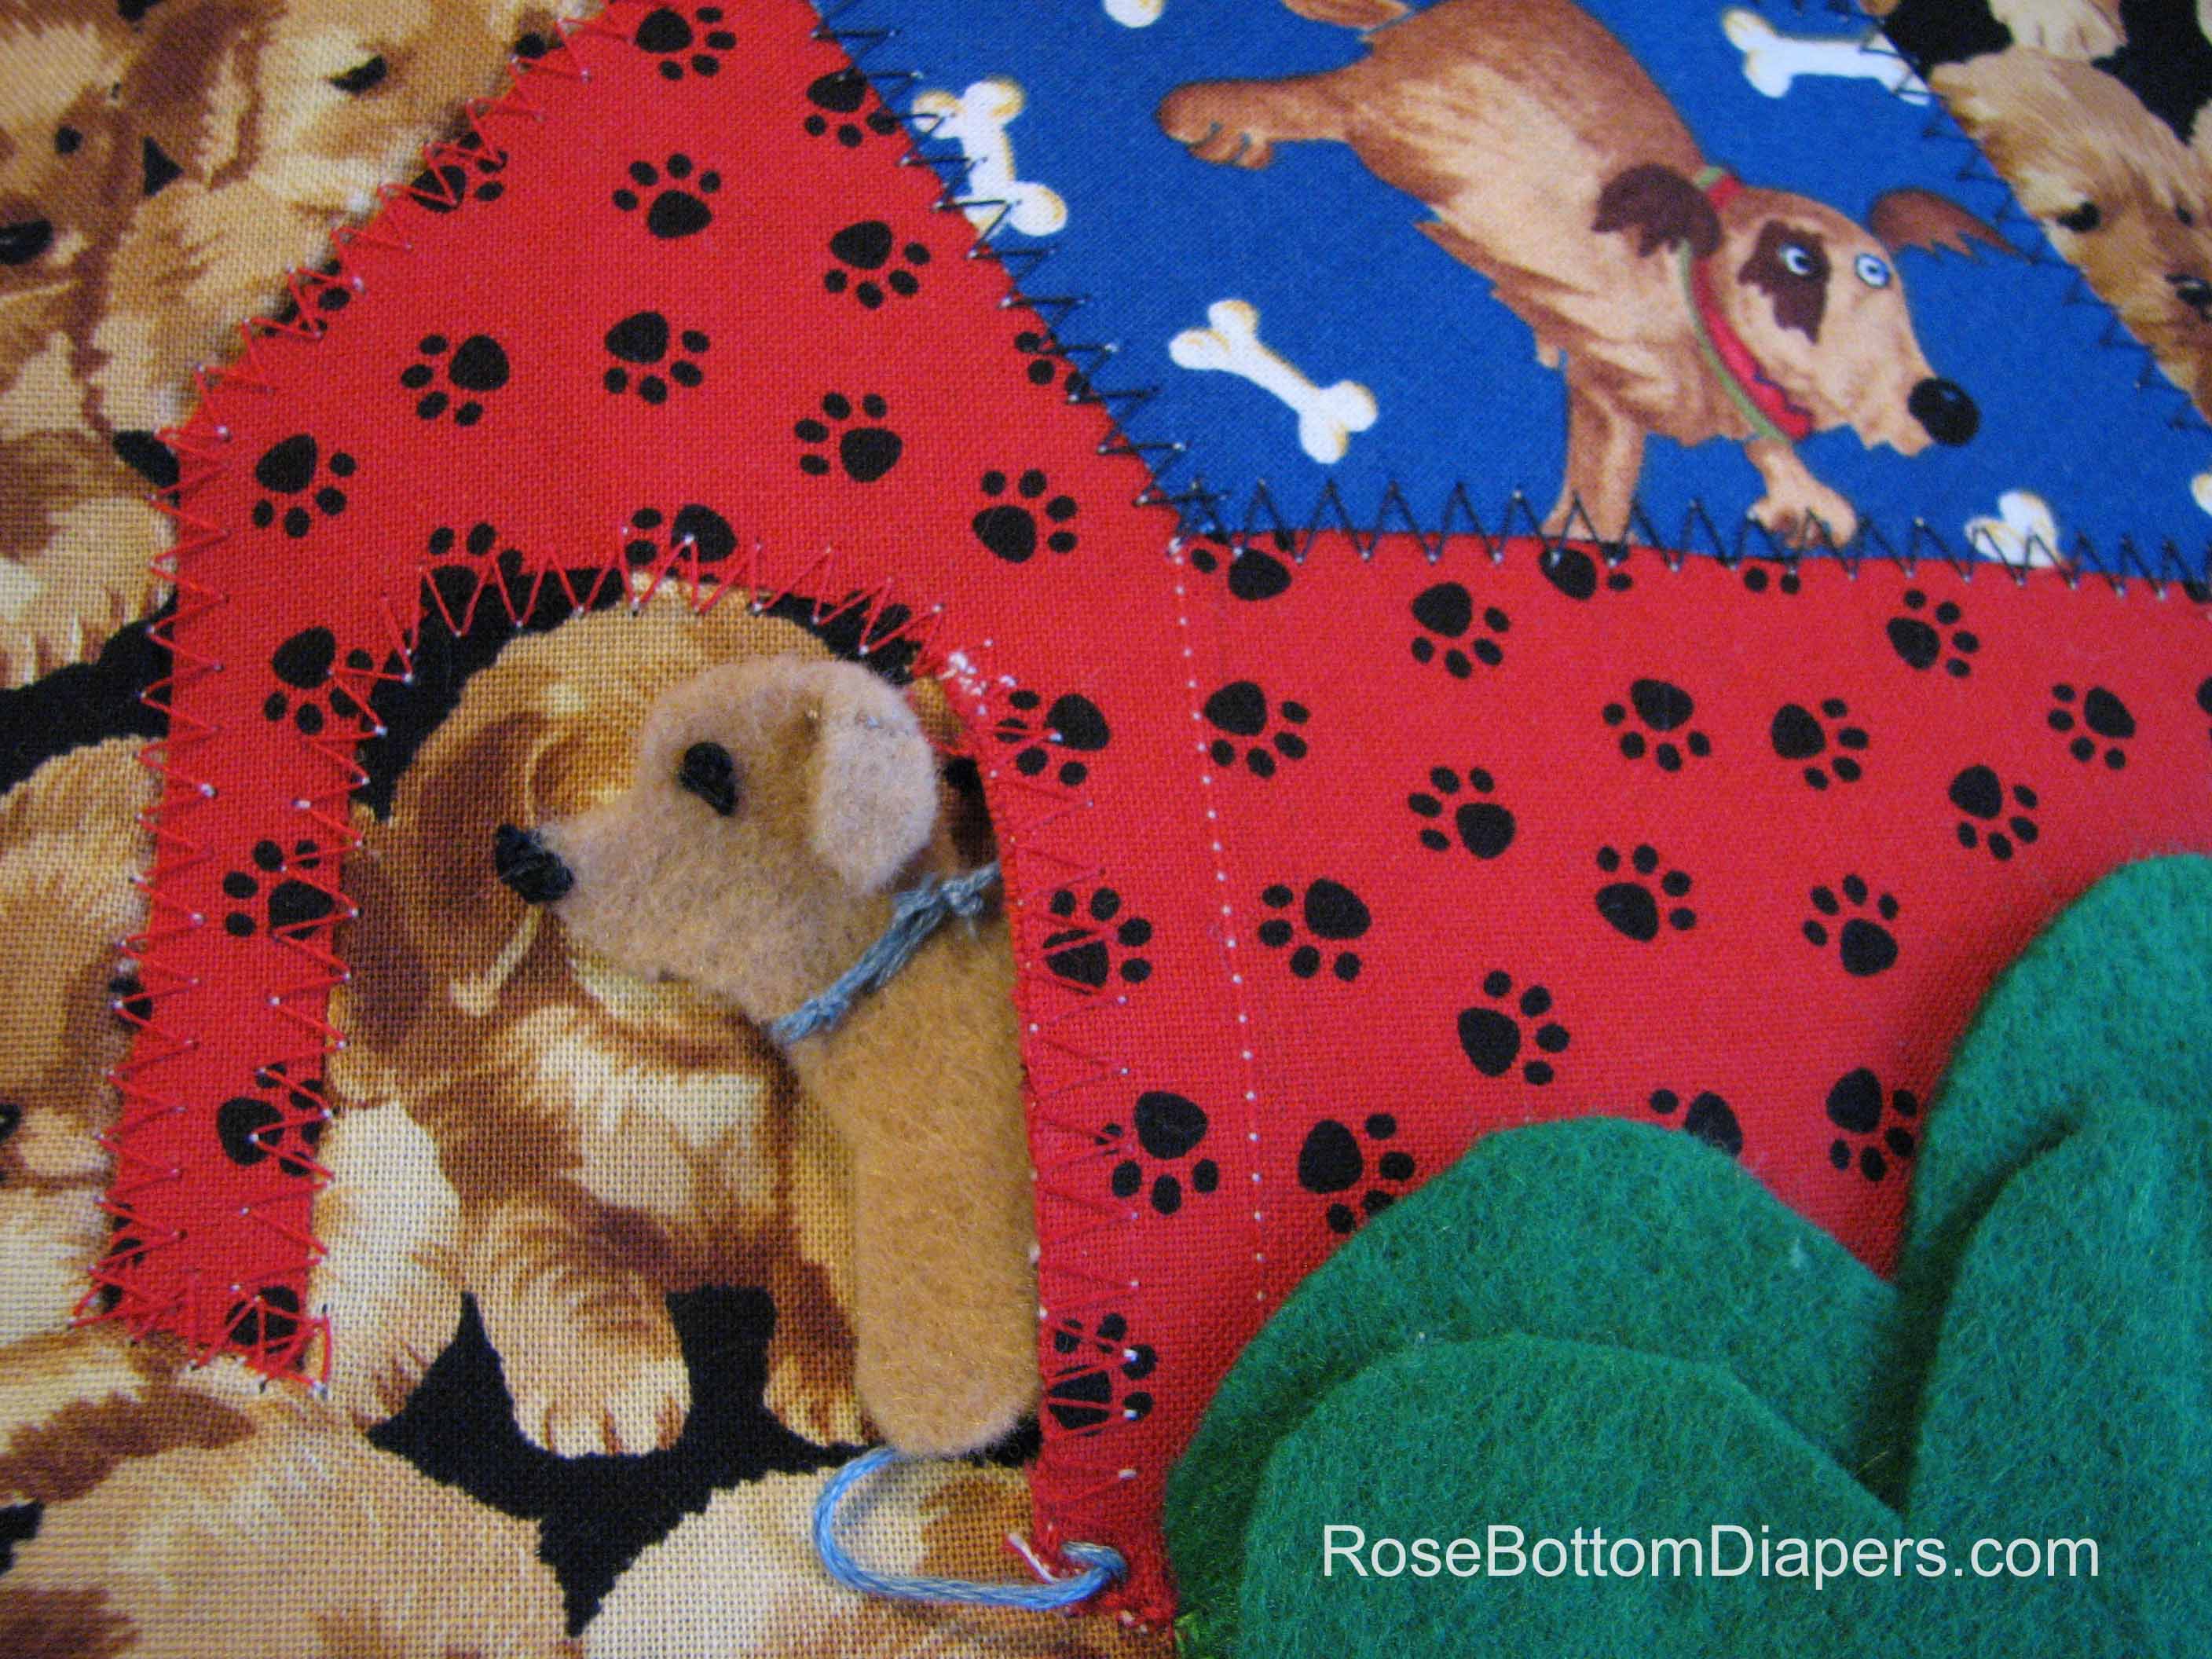 Peekaboo Puppy quiet book page.  Busy book ideas from RoseBottomDiapers.com